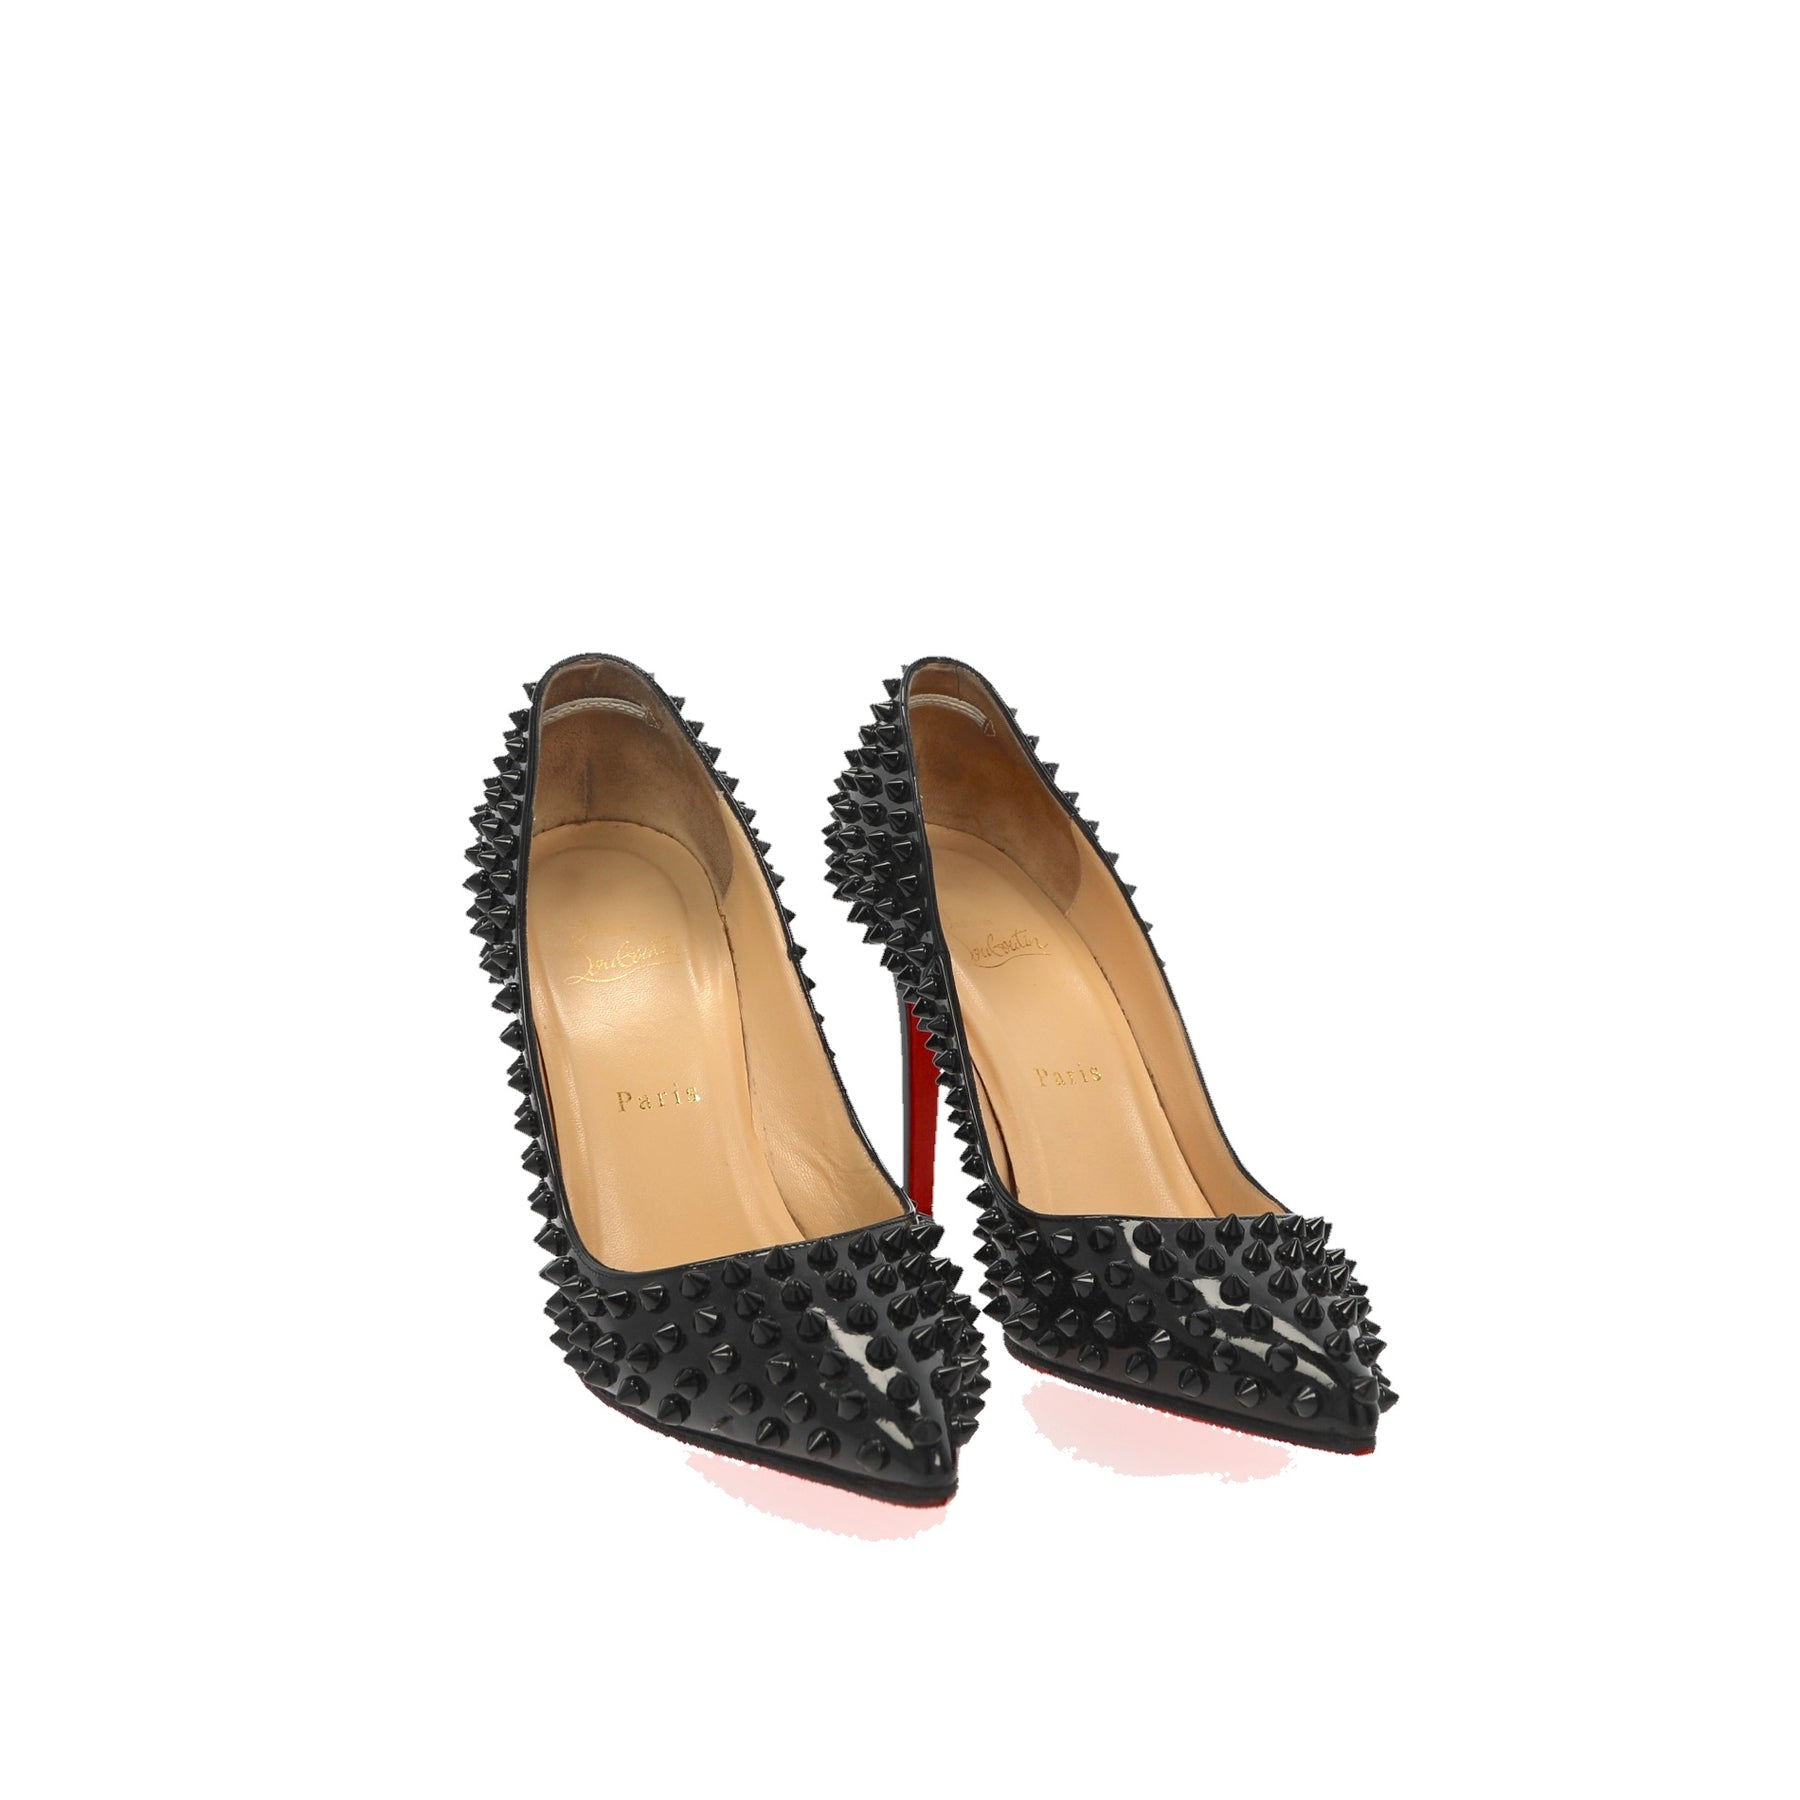 Christian Louboutin Pigalle Spikes